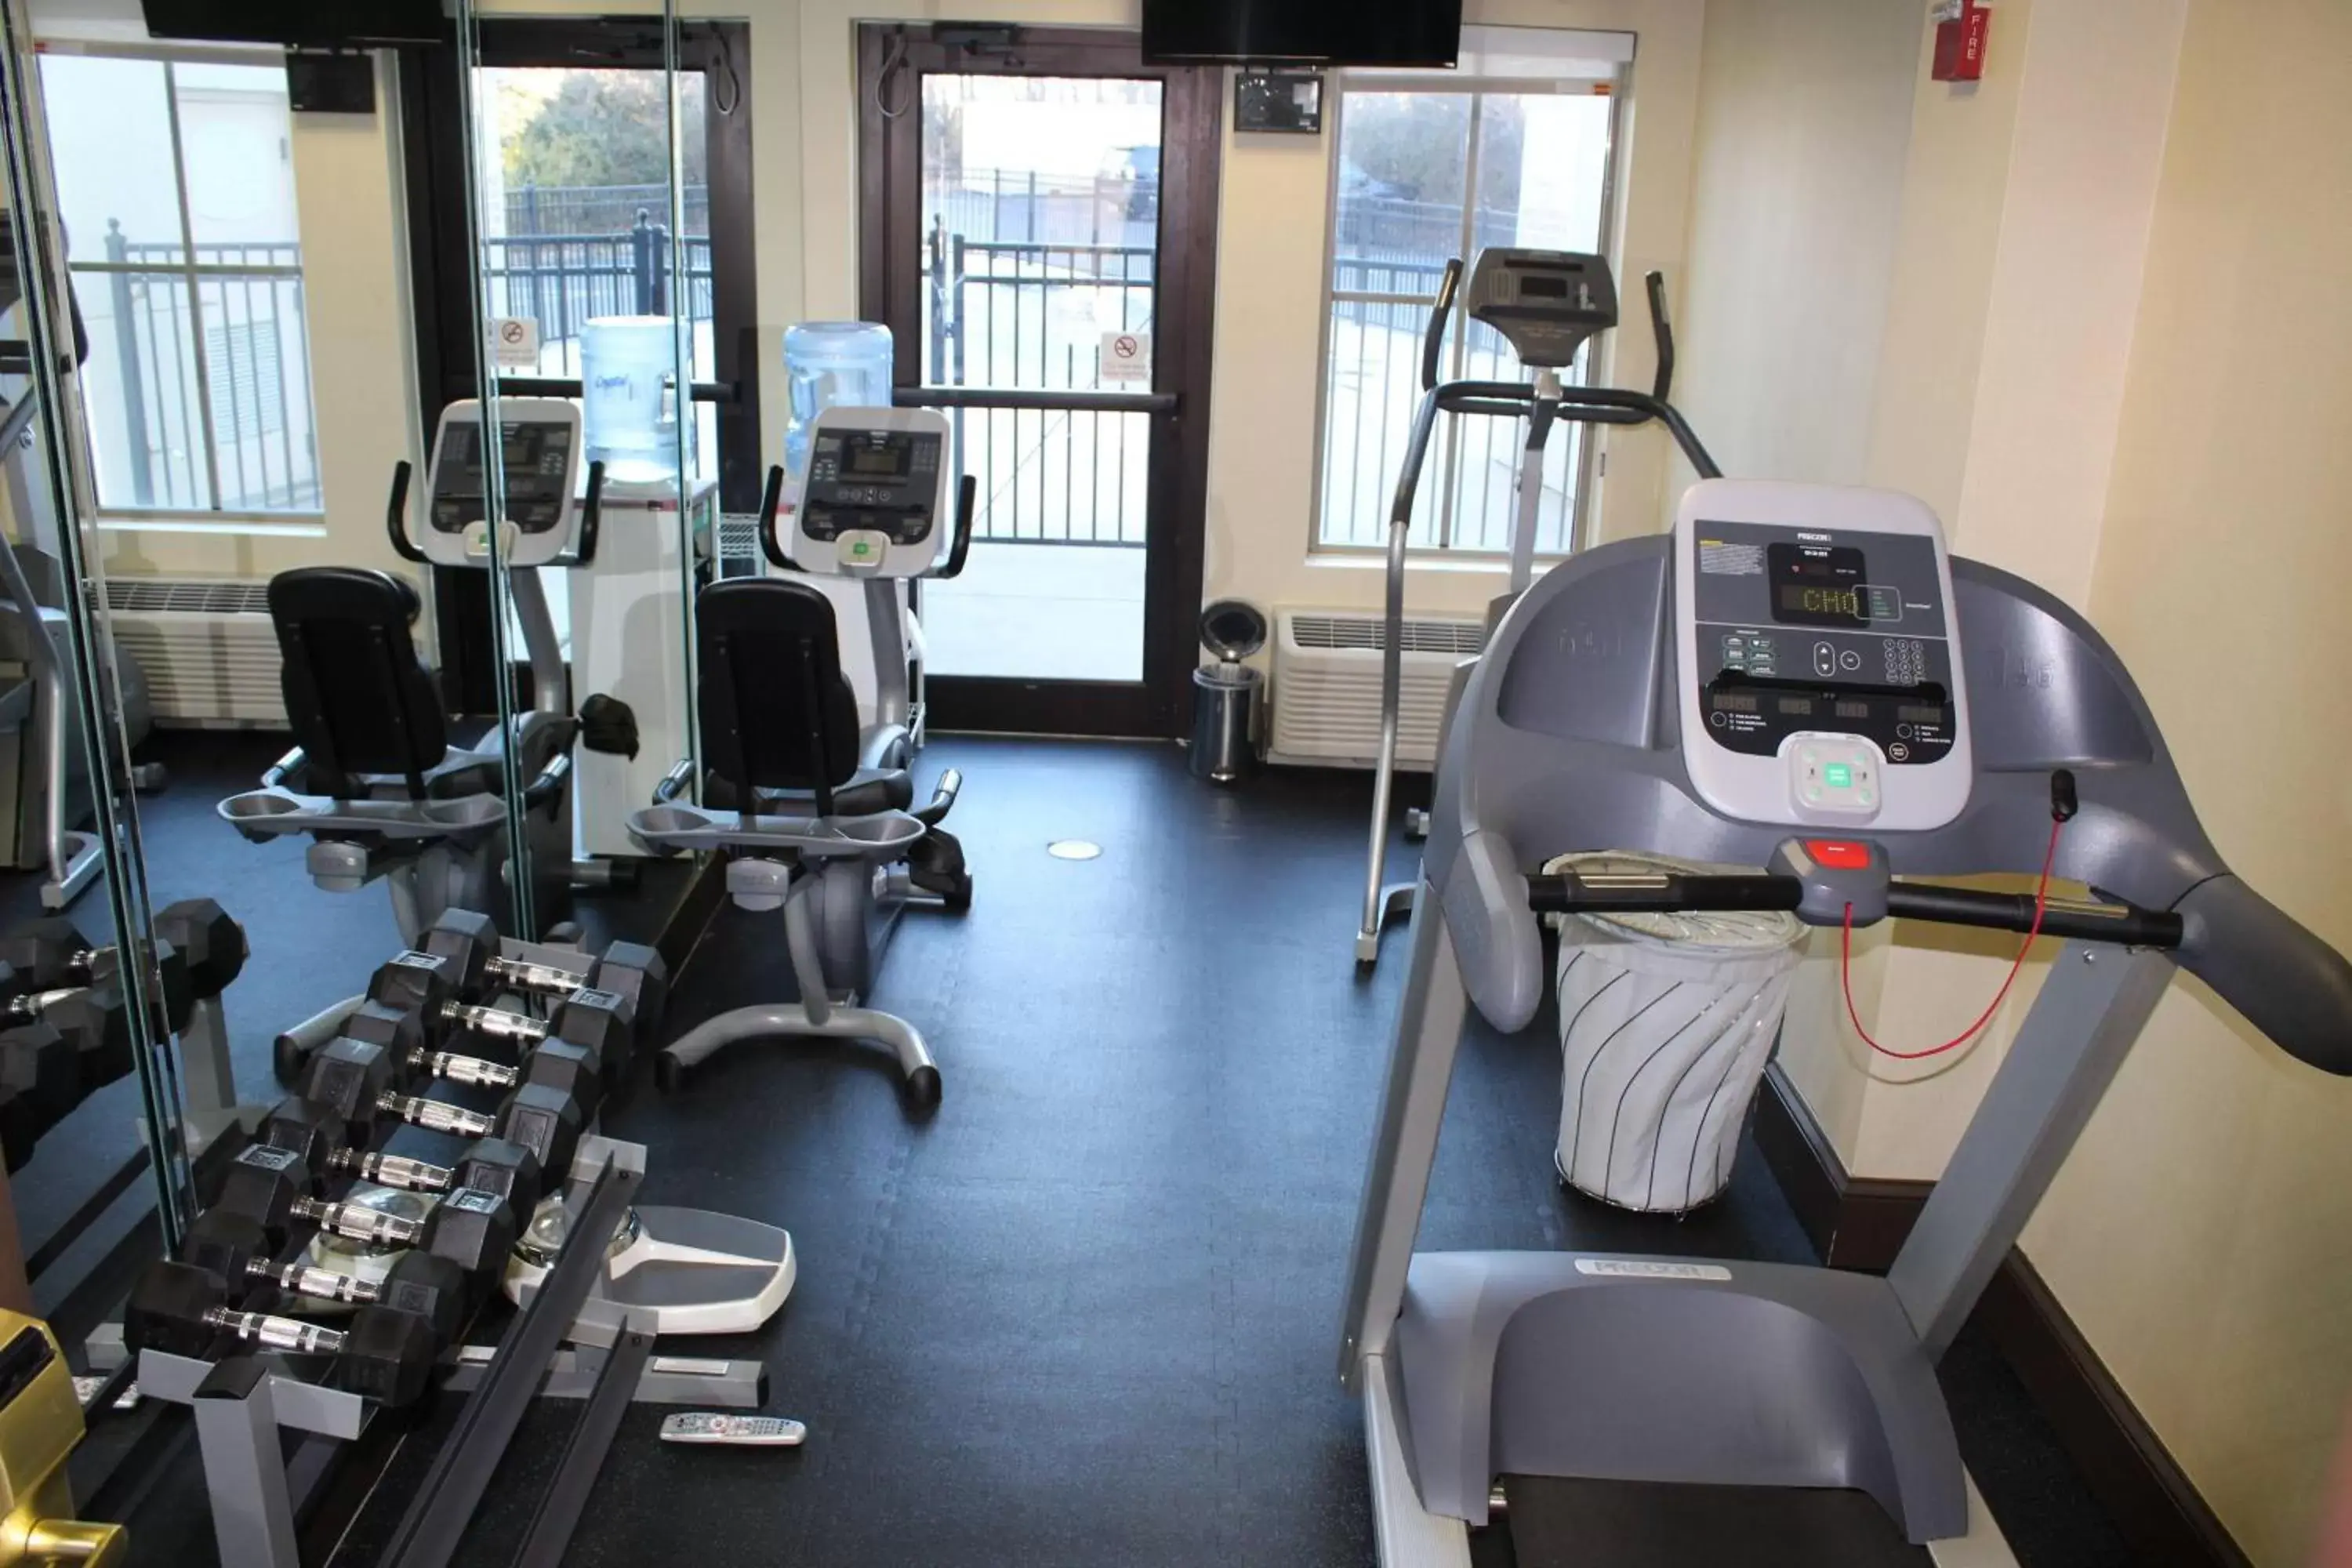 Fitness centre/facilities, Fitness Center/Facilities in TownePlace Suites Wilmington Newark / Christiana